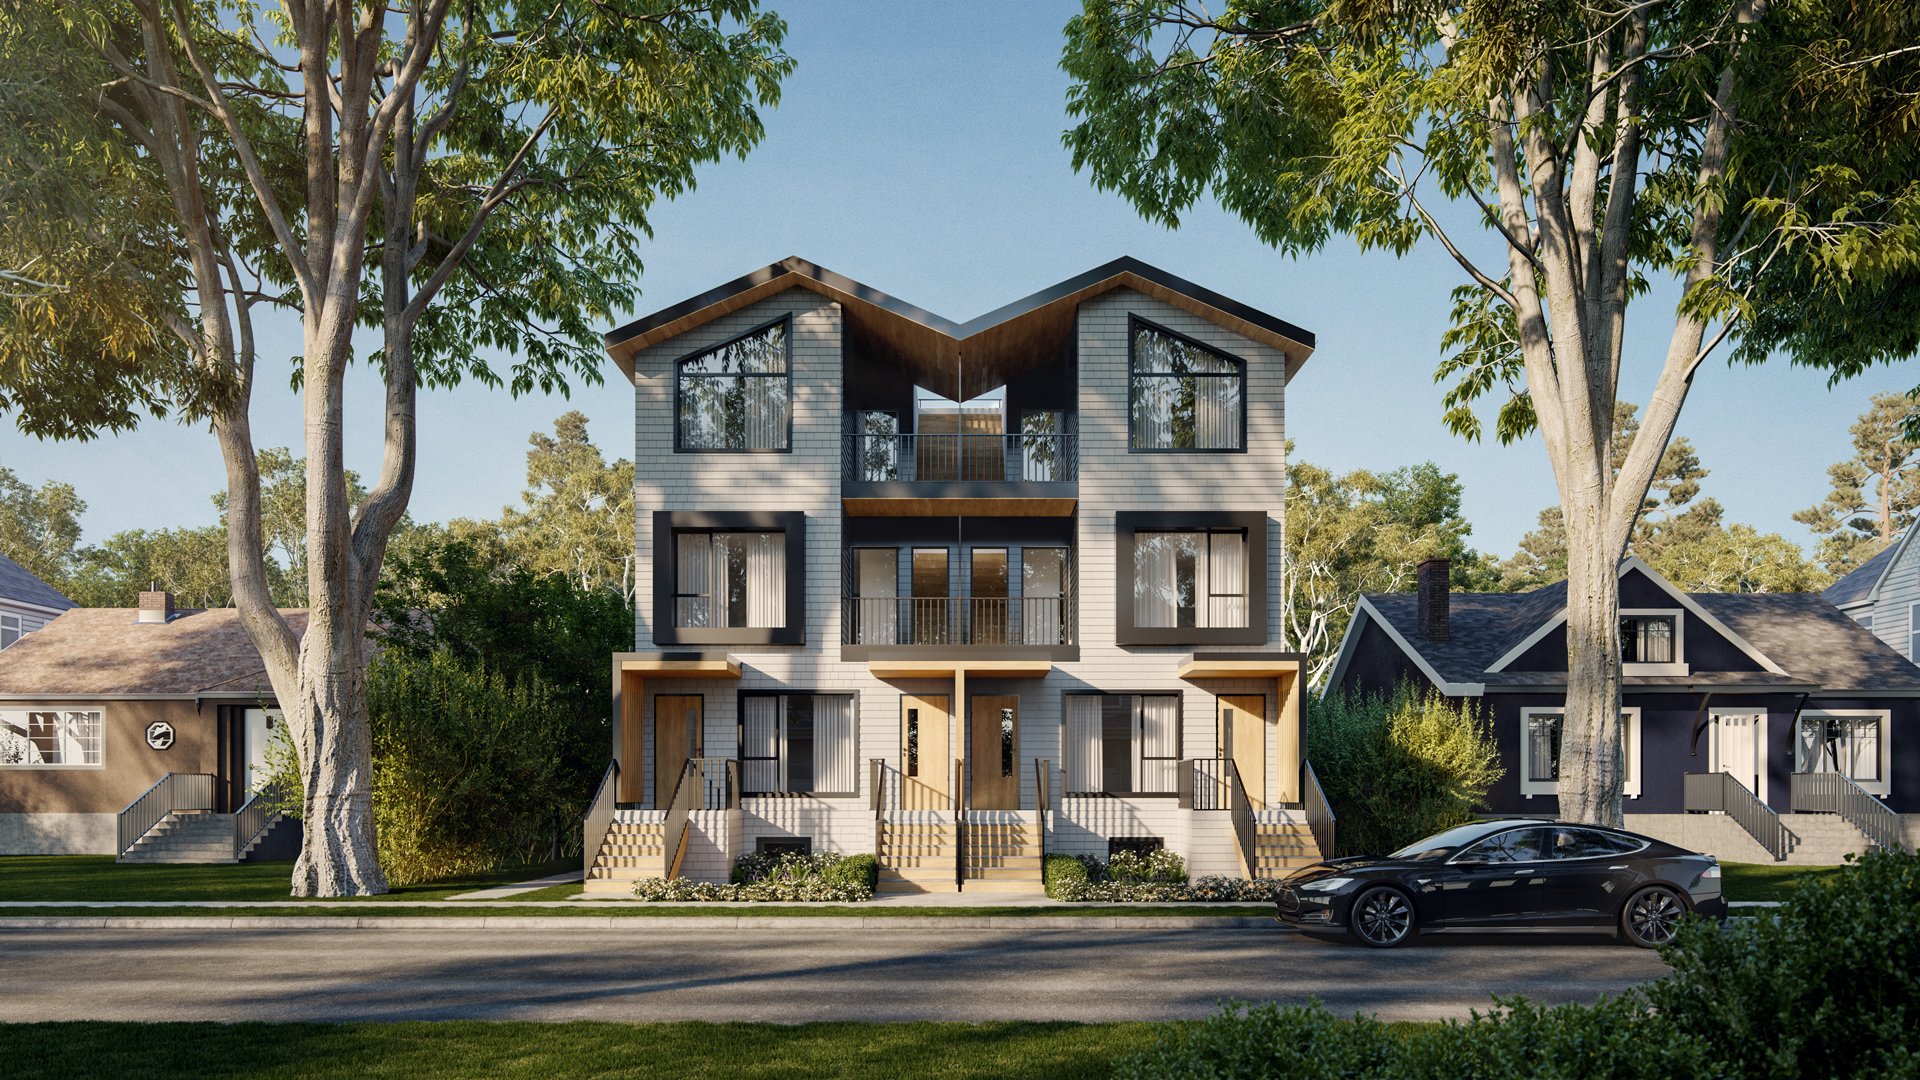 Six 2- & 4-bedroom townhomes on a quiet tree-lined street on Vancouver’s West Side.